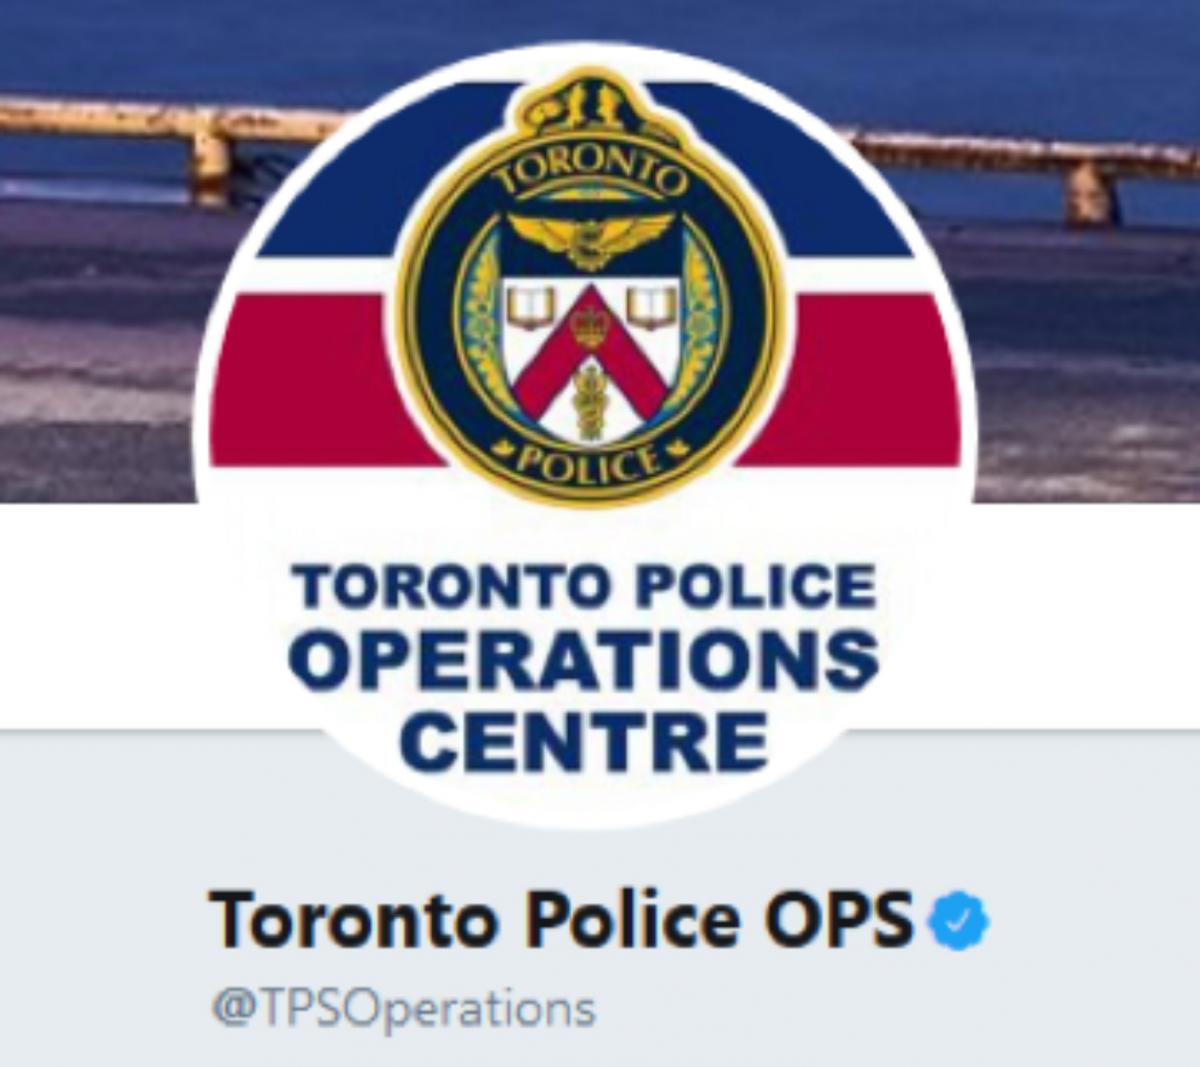 Toronto Police OPS Twitter Account